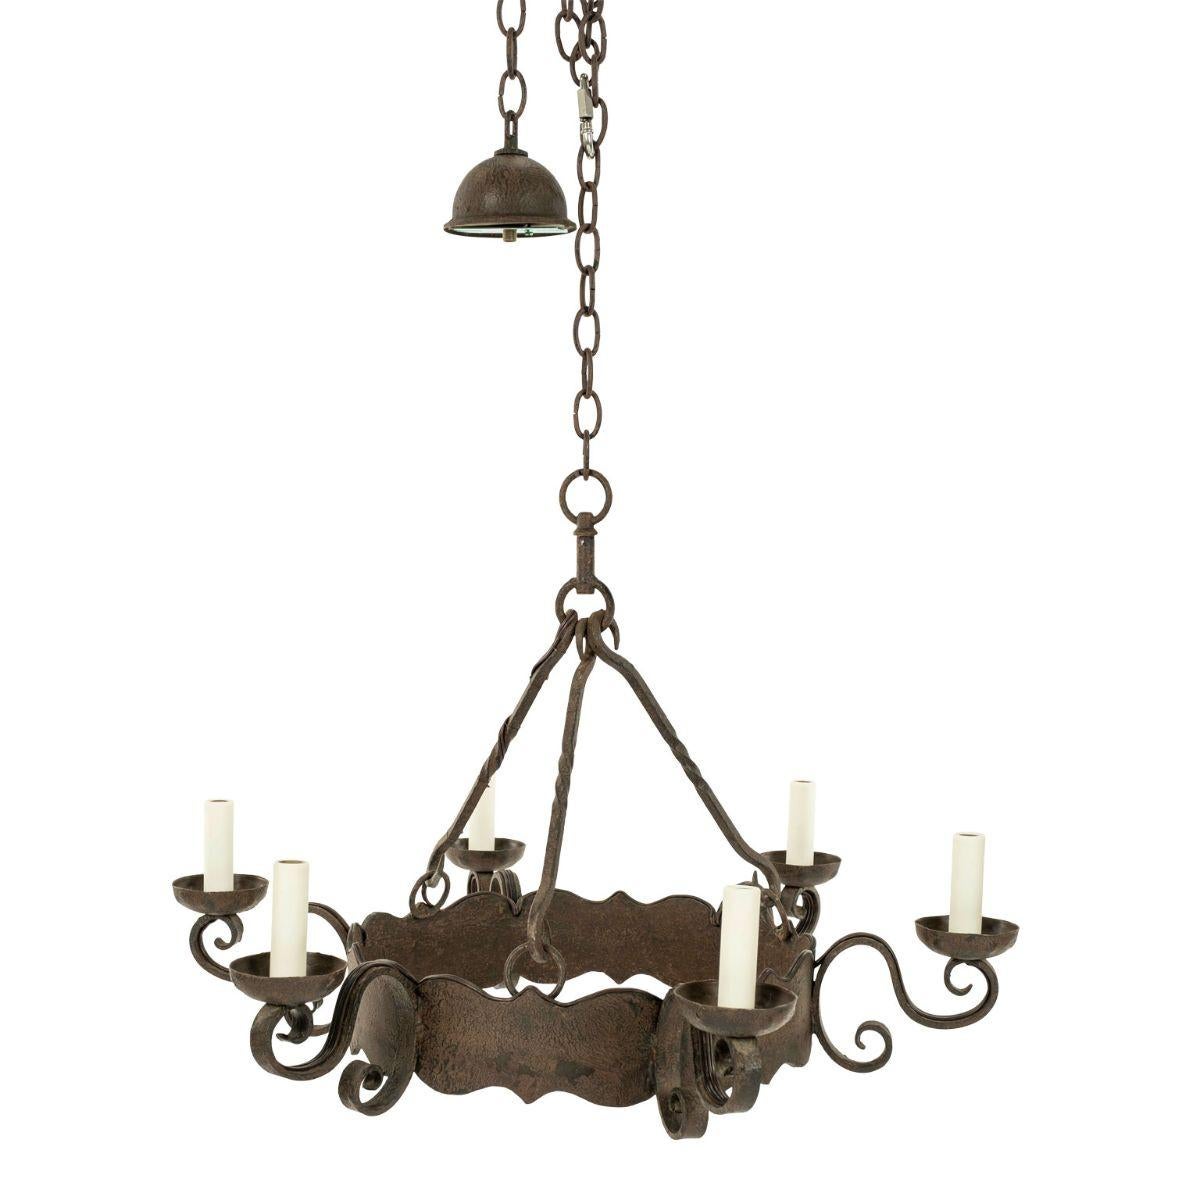 Round heavy iron chandelier dating to the late 19th or early 20th century. Decorative round scalloped band iron chandelier with six scrolled arms. Newly wired for use within the USA using UL listed parts. Includes chain and canopy. Height measured